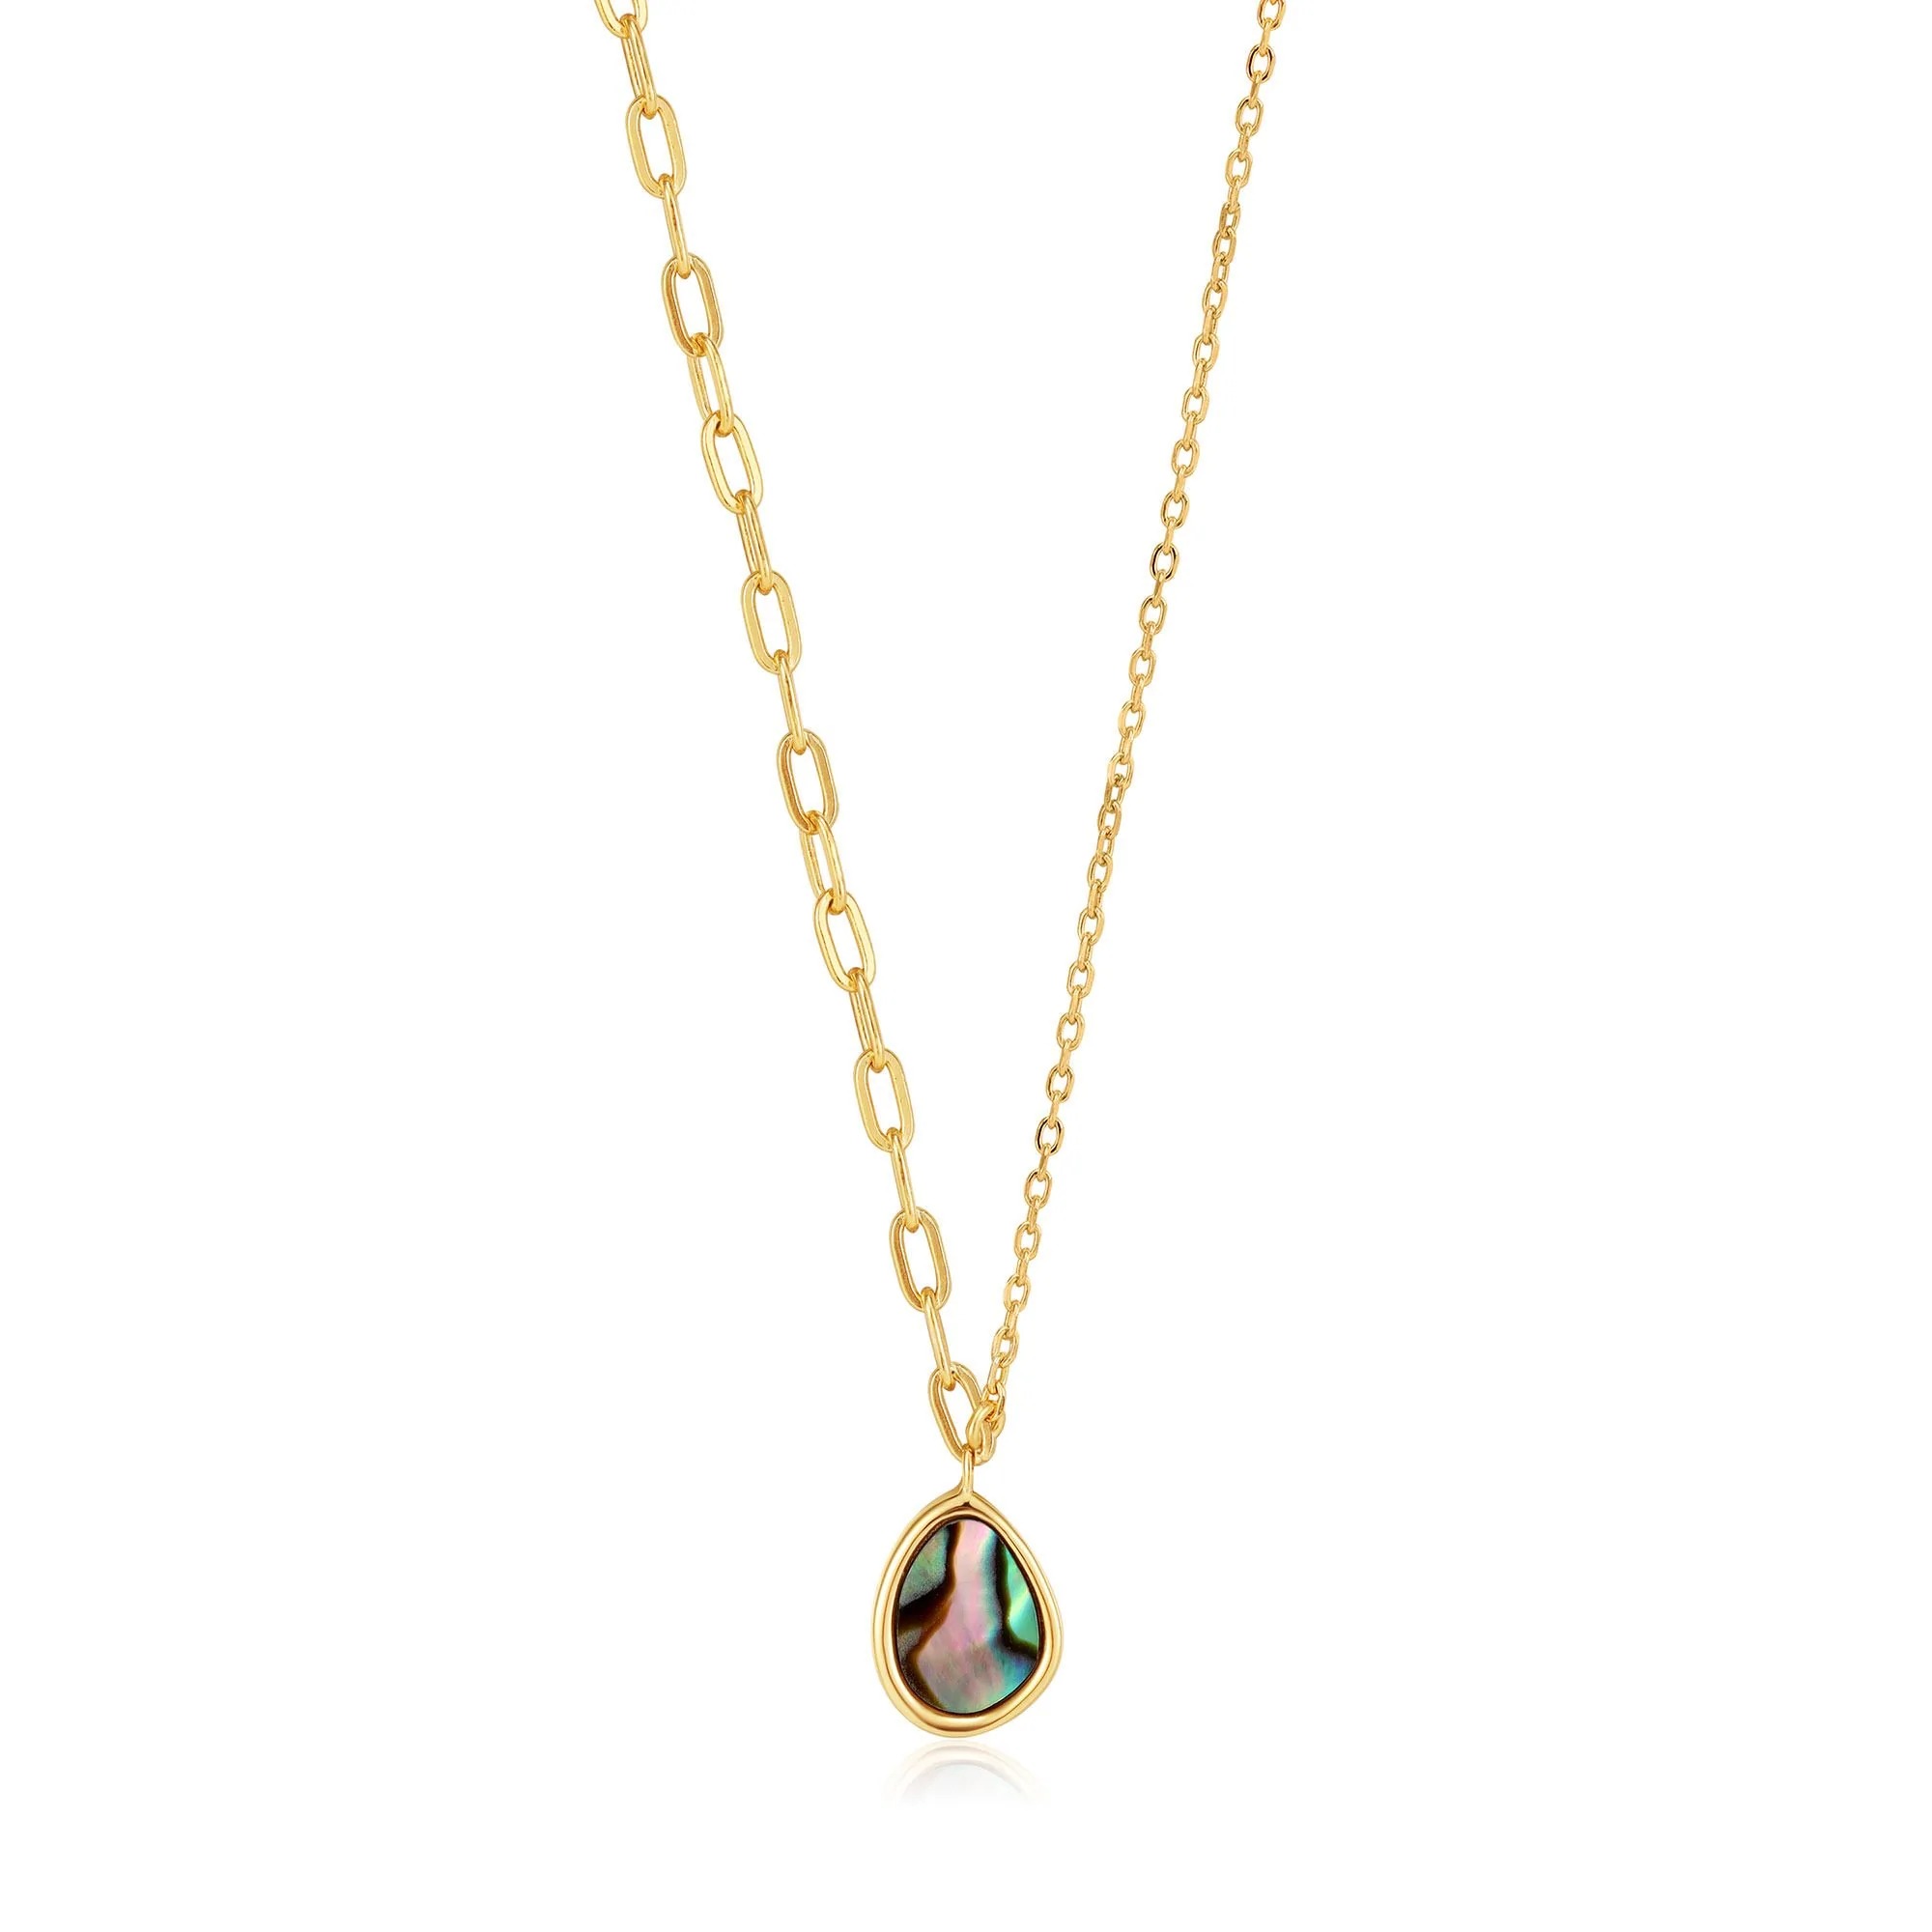 ANIA HAIE Tidal Abalone Mixed Link Necklace, Gold Plated